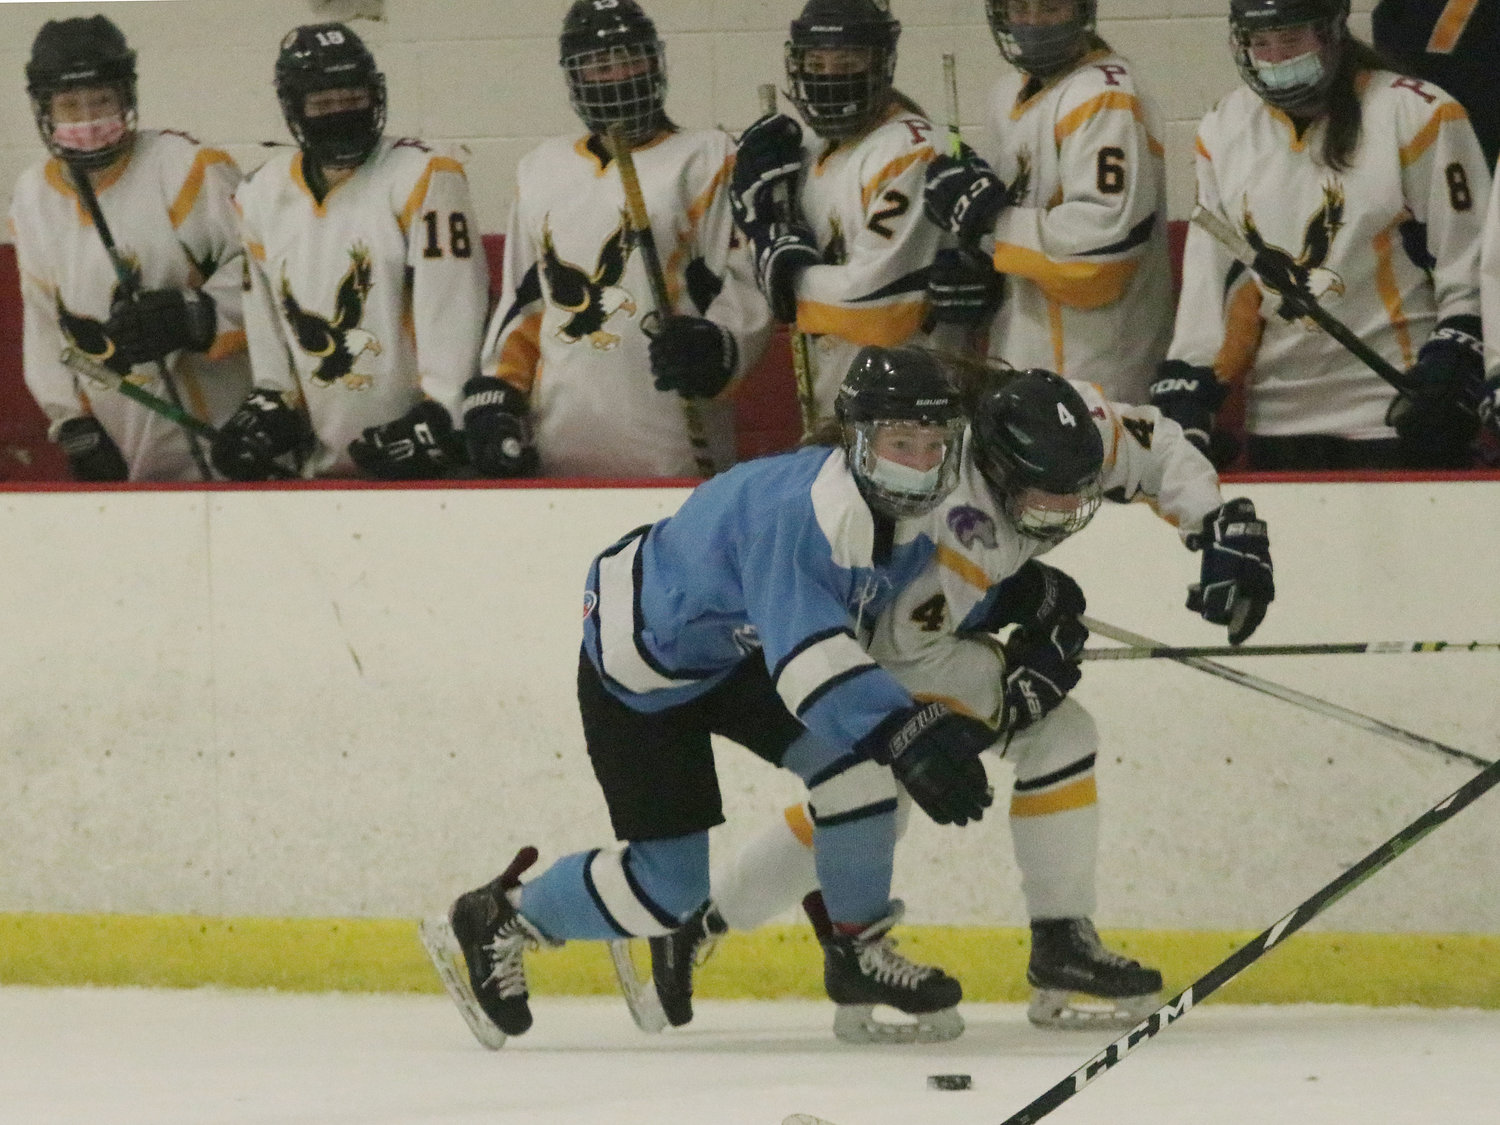 Marissa Levreault gets taken down while breaking up ice in Game 2.